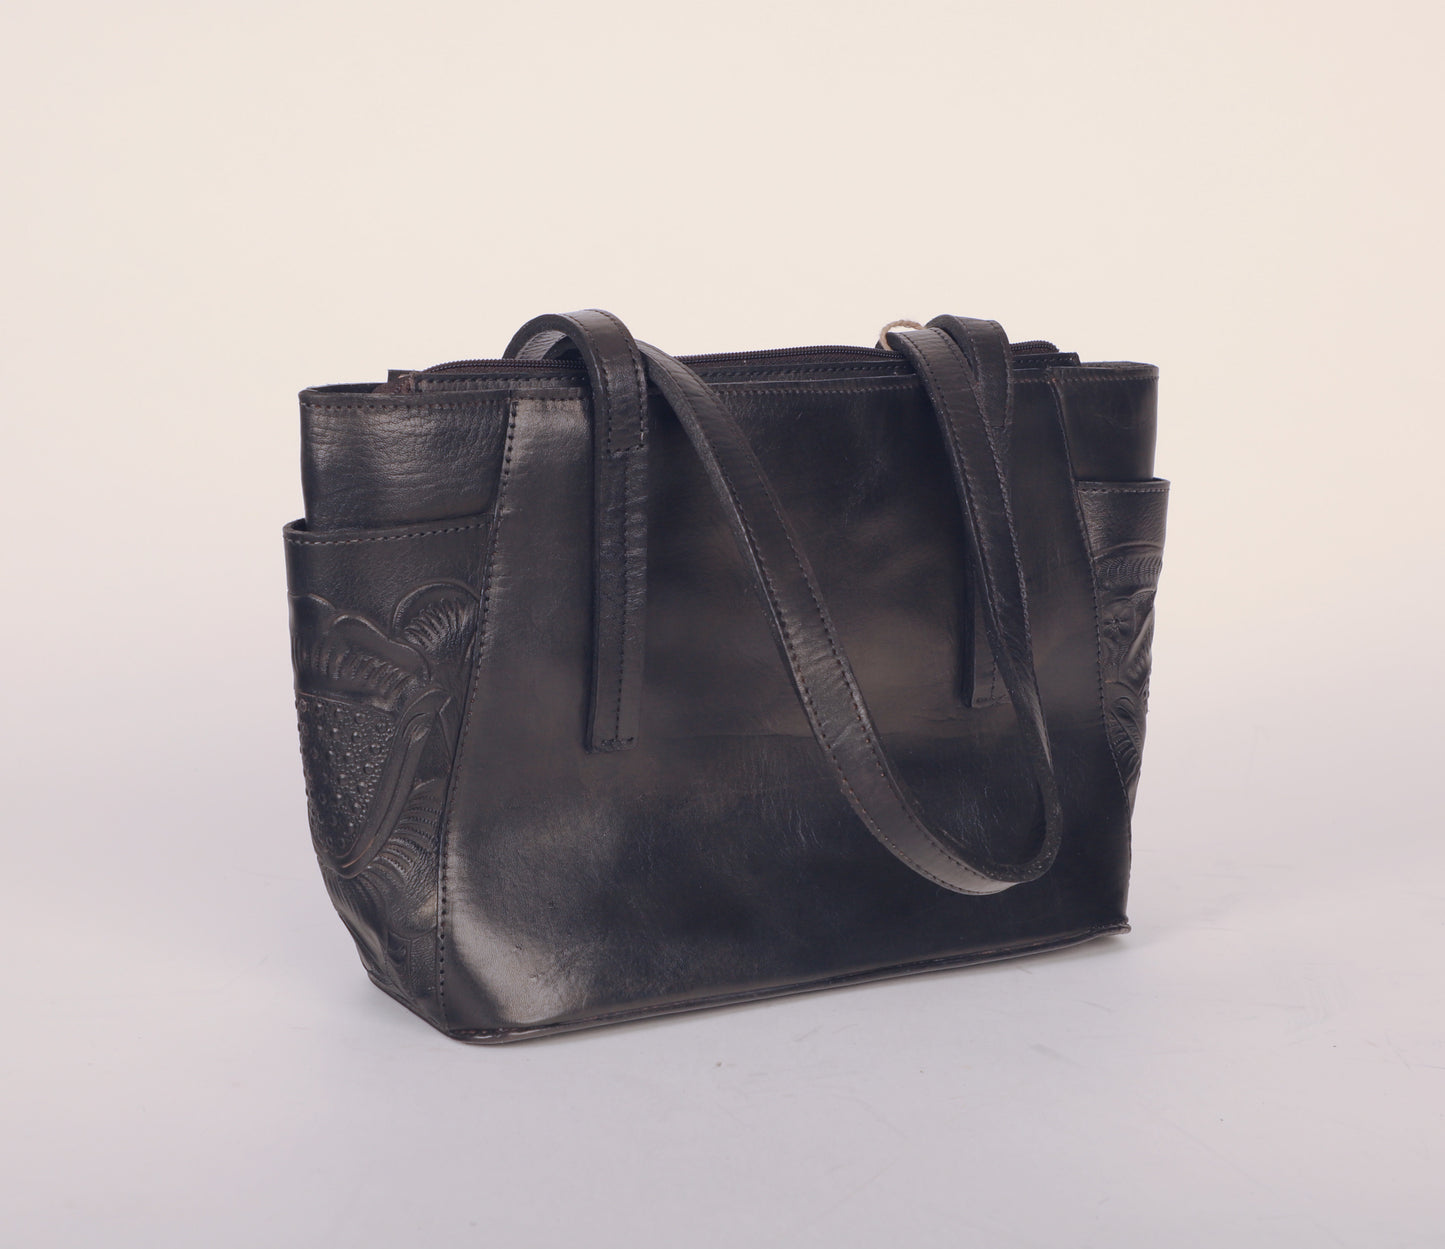 Medium-sized full leather tote bag with traditional Mexican design on side pockets. Fully lined with suede.  Color black.